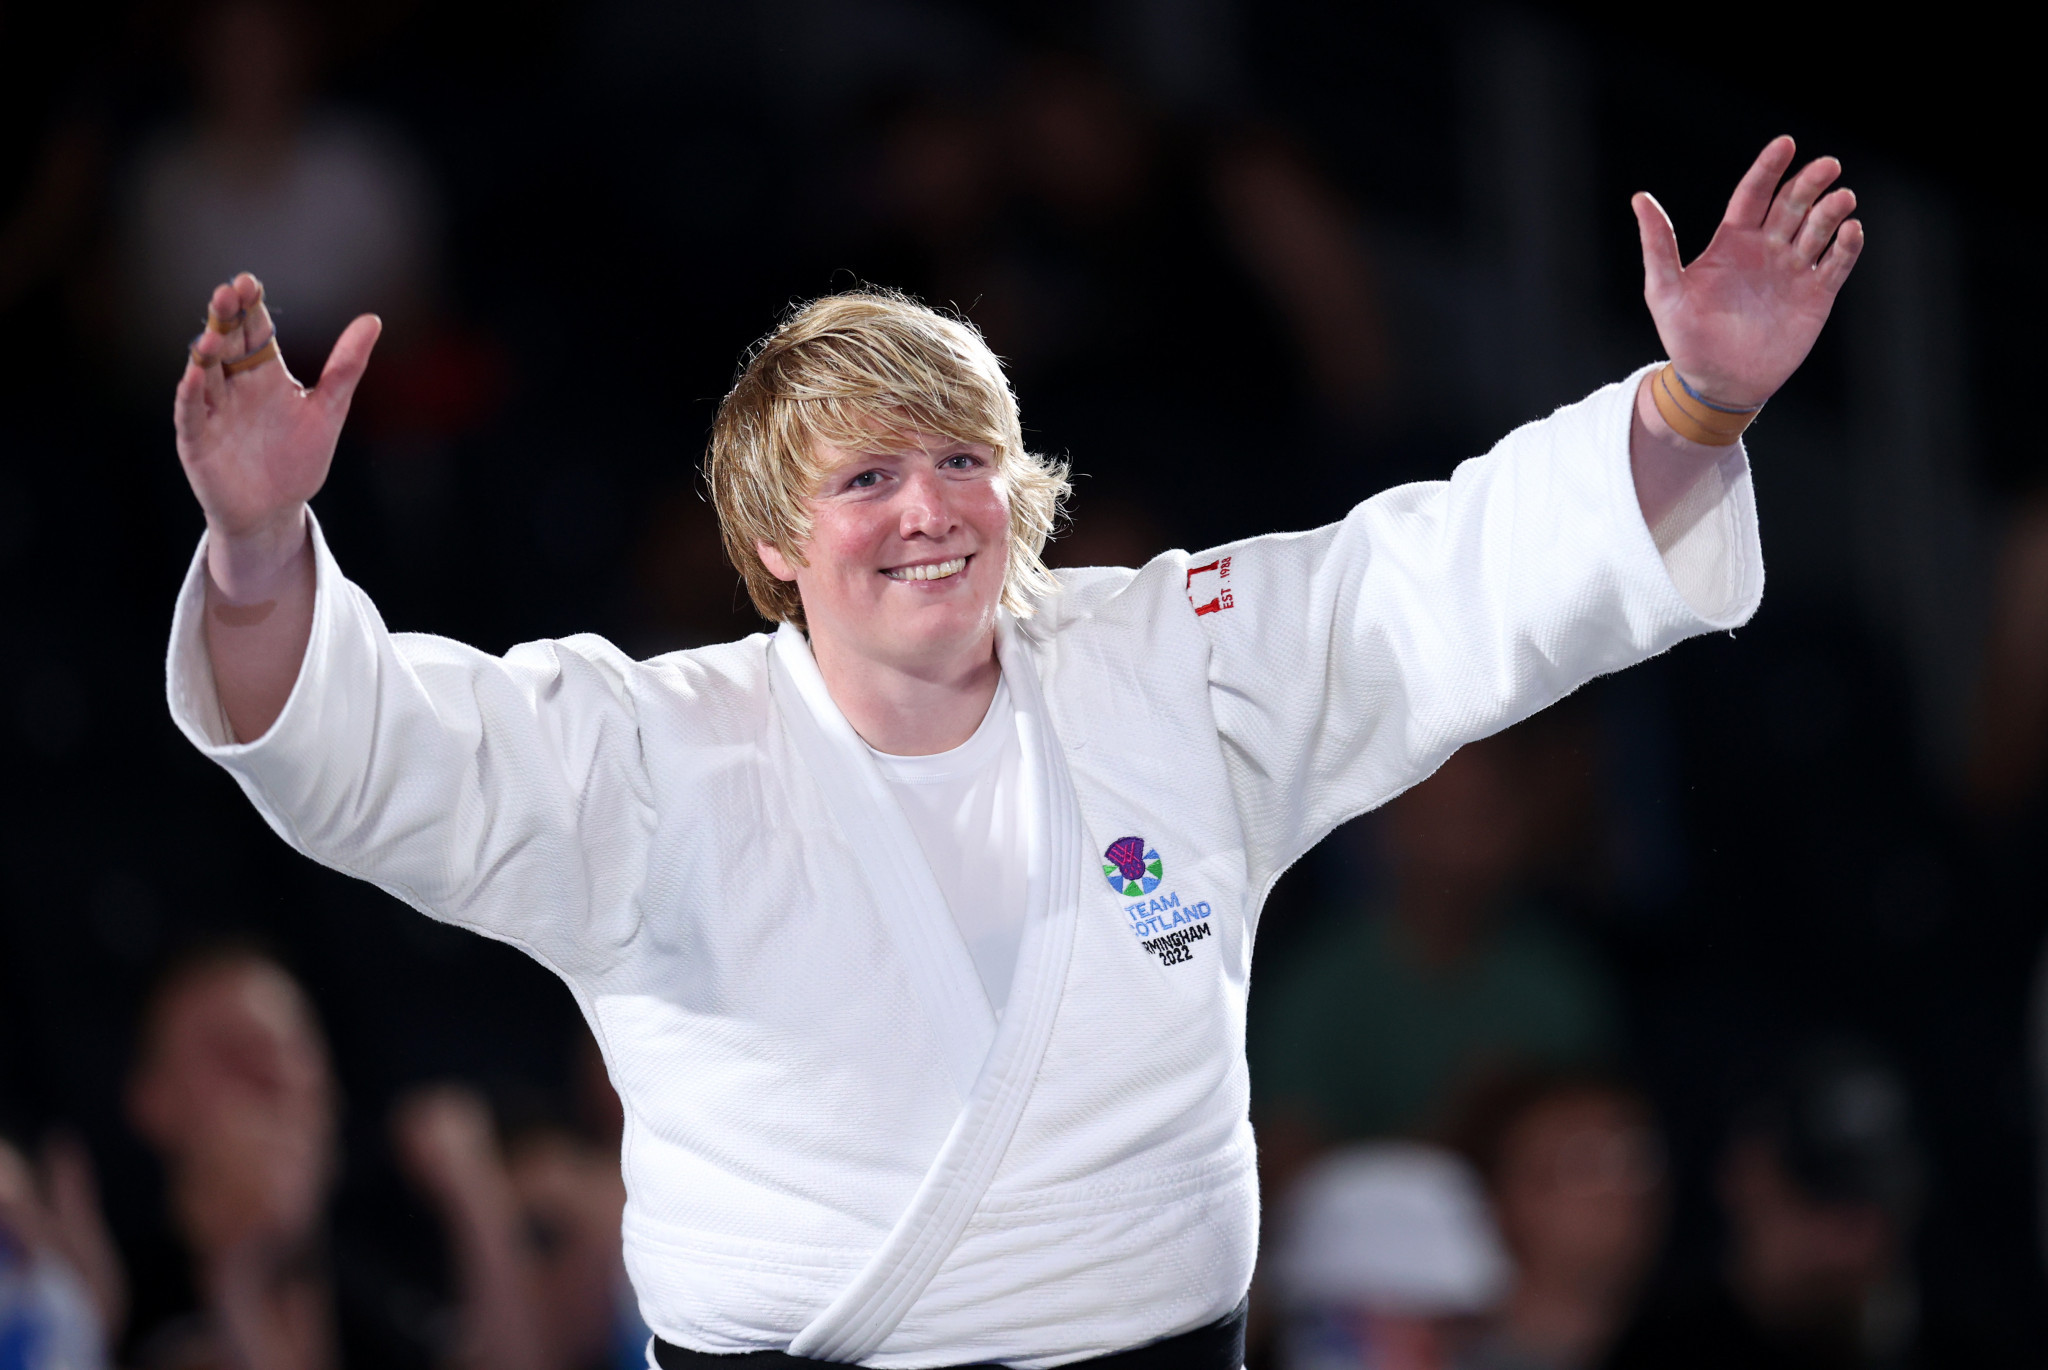 Sarah Adlington of Scotland won her first gold medal at the Commonwealth Games today in the over-78kg women's judo division ©Getty Images